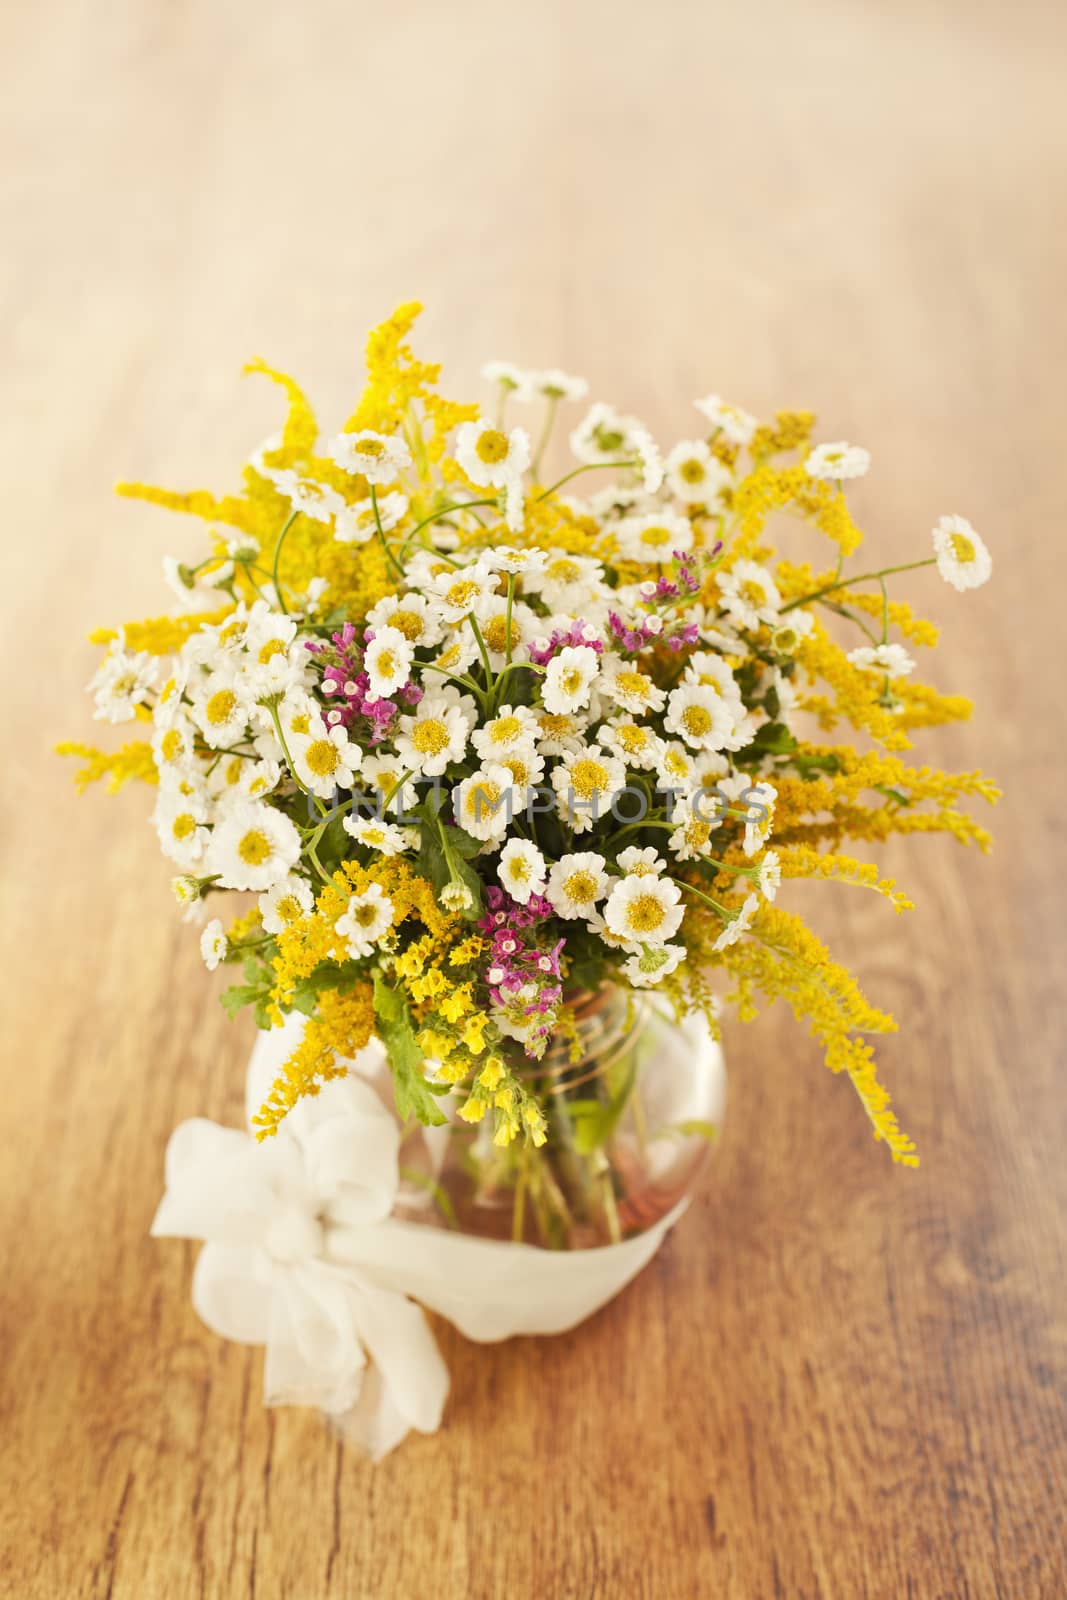 Beautiful bouquet of wildflowers in vase on wooden background